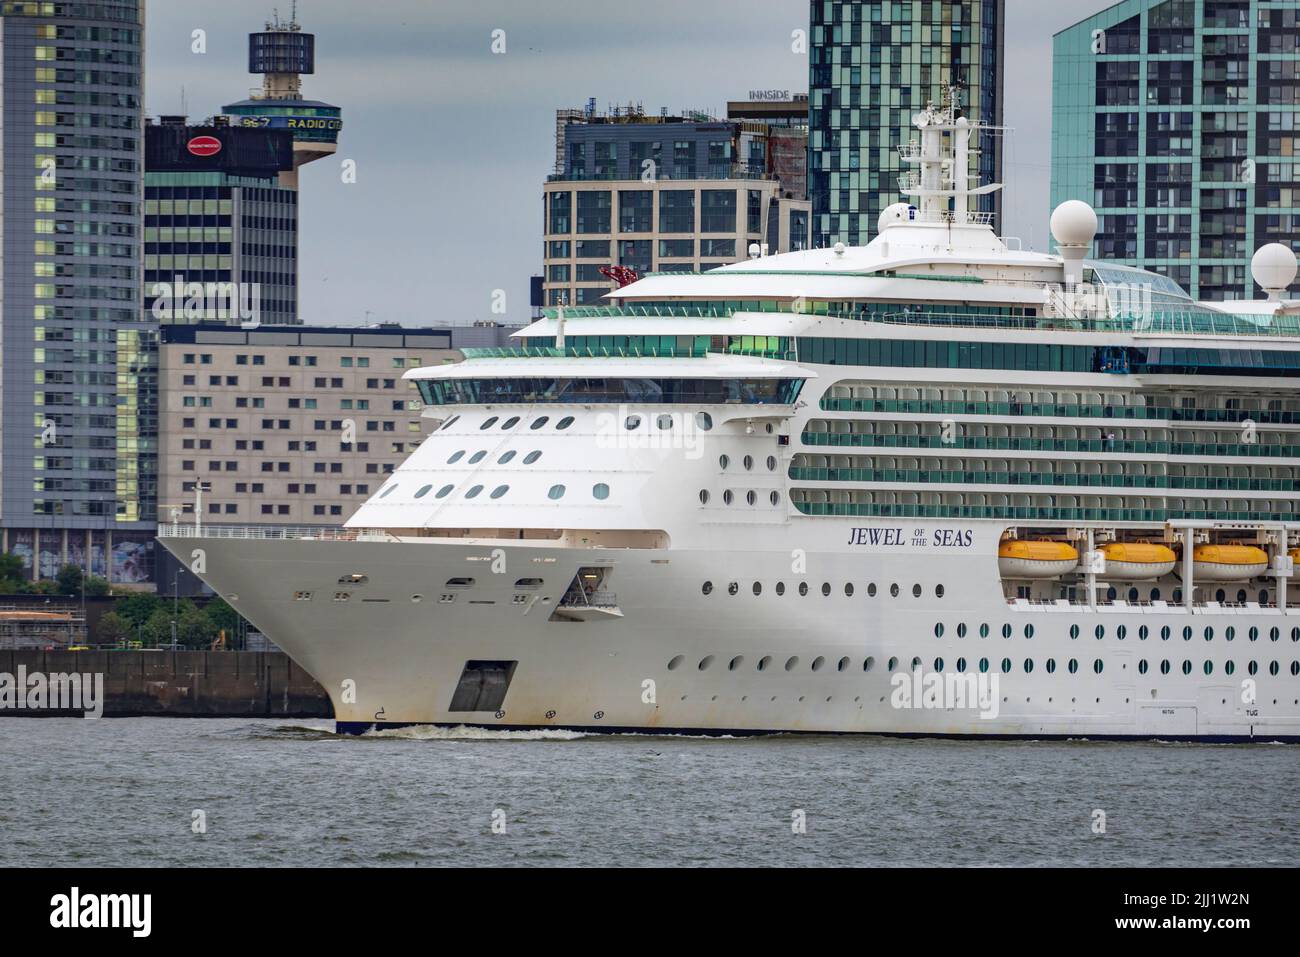 Jewel of the Seas ithe Radiance-class cruise ship operated by Royal Caribbean seen at Liverpool pierhead on the river Mersey. Stock Photo